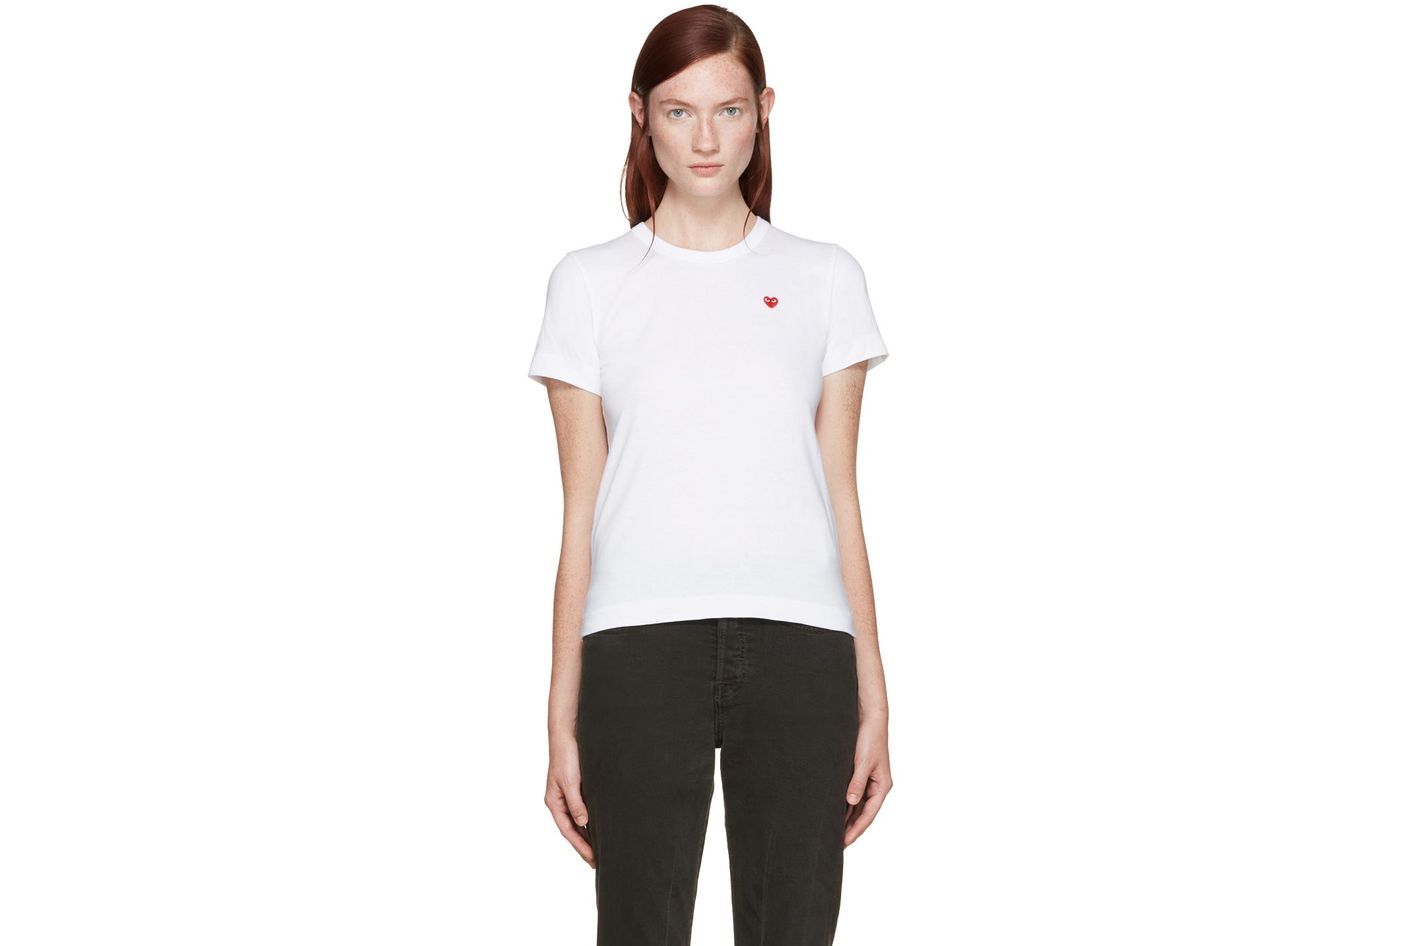 What’s the Best White T-shirt for Women?